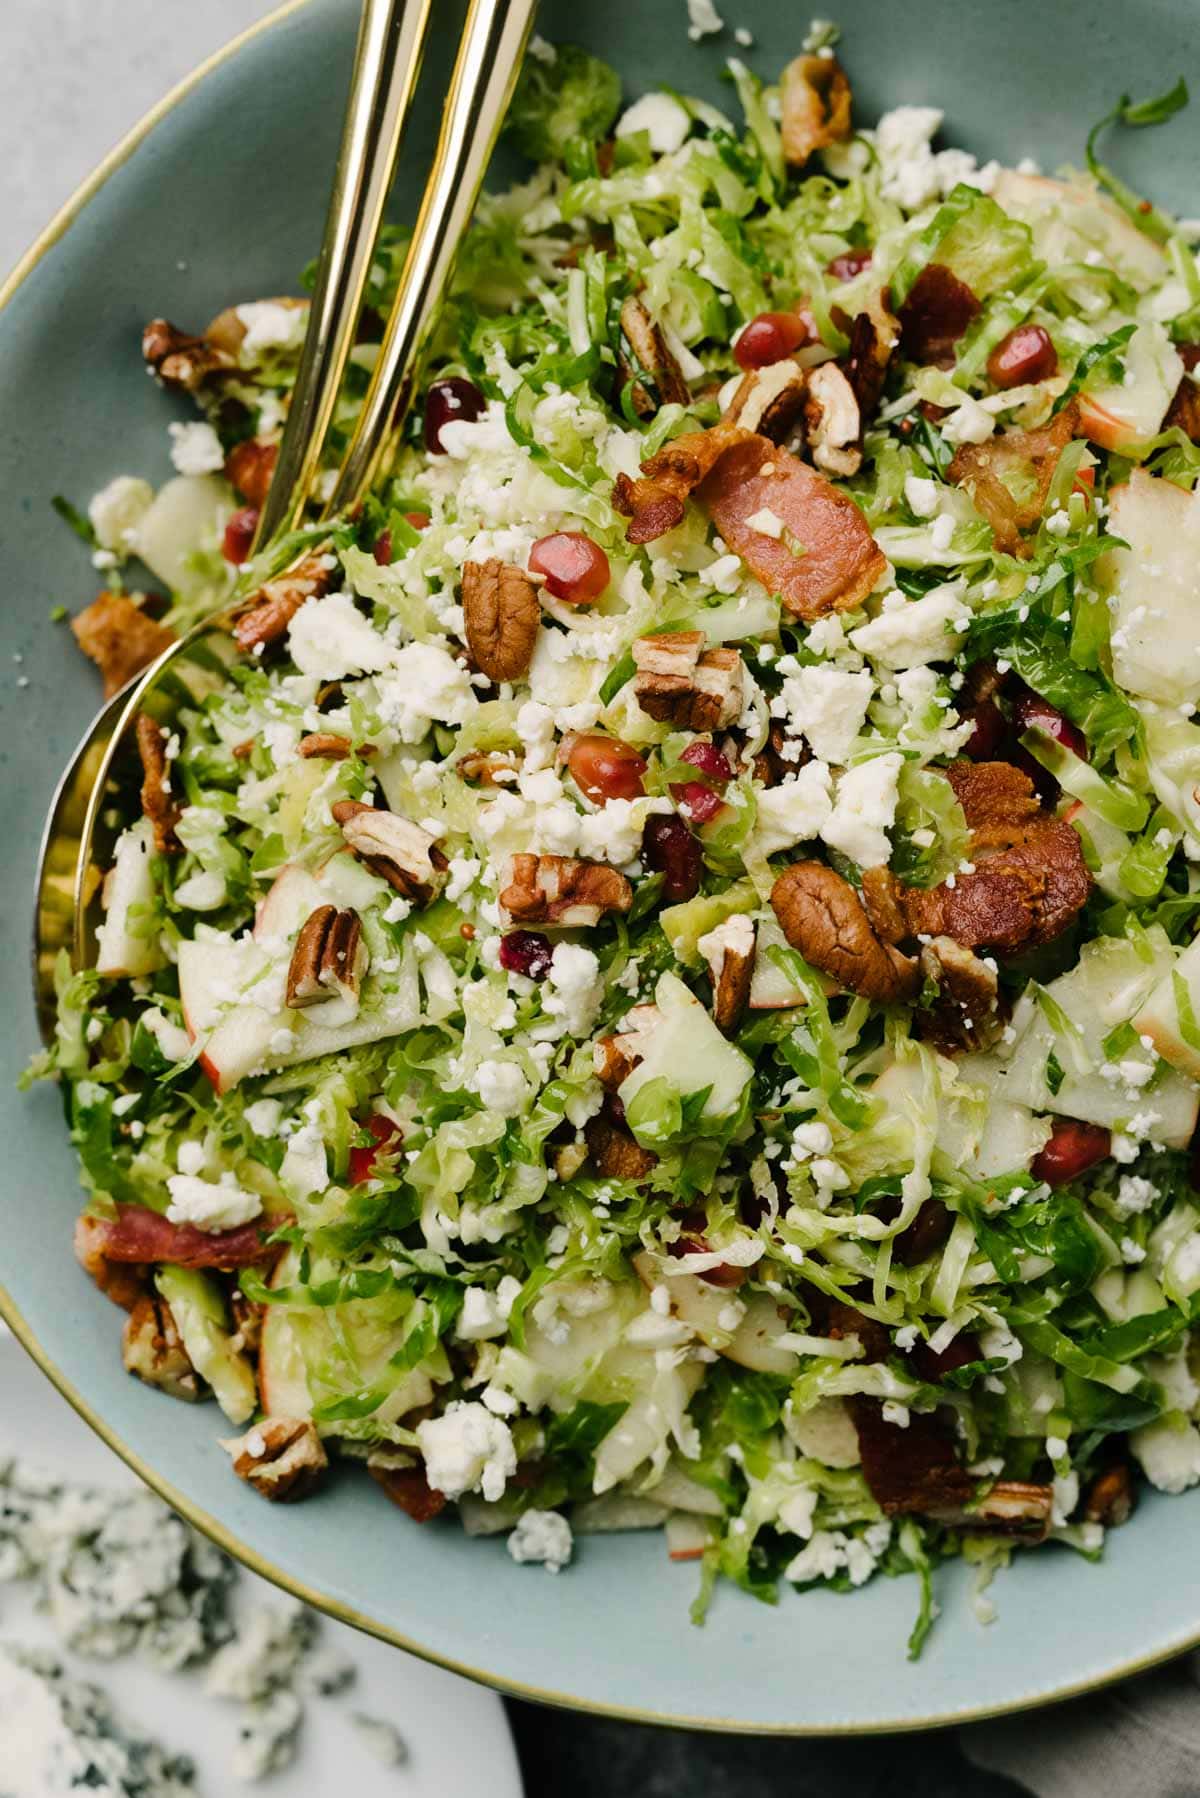 Gold serving utensils tucked into a Brussels sprout salad in a large blue, garnished with pecans, pomegranate seeds, and crumbled blue cheese.